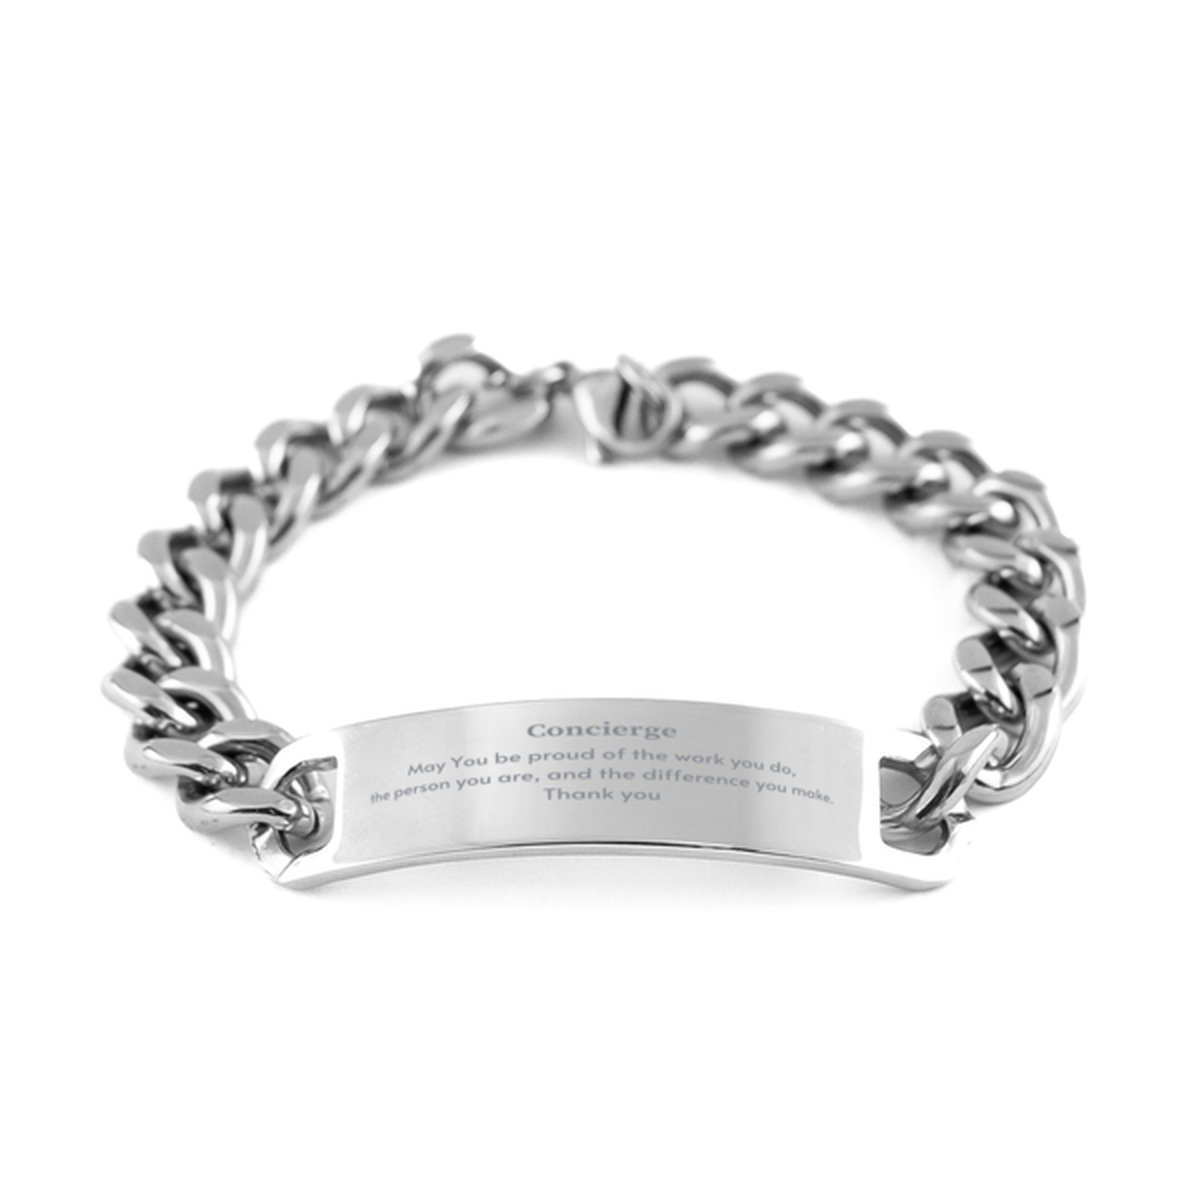 Heartwarming Cuban Chain Stainless Steel Bracelet Retirement Coworkers Gifts for Concierge, Concierge May You be proud of the work you do, the person you are Gifts for Boss Men Women Friends